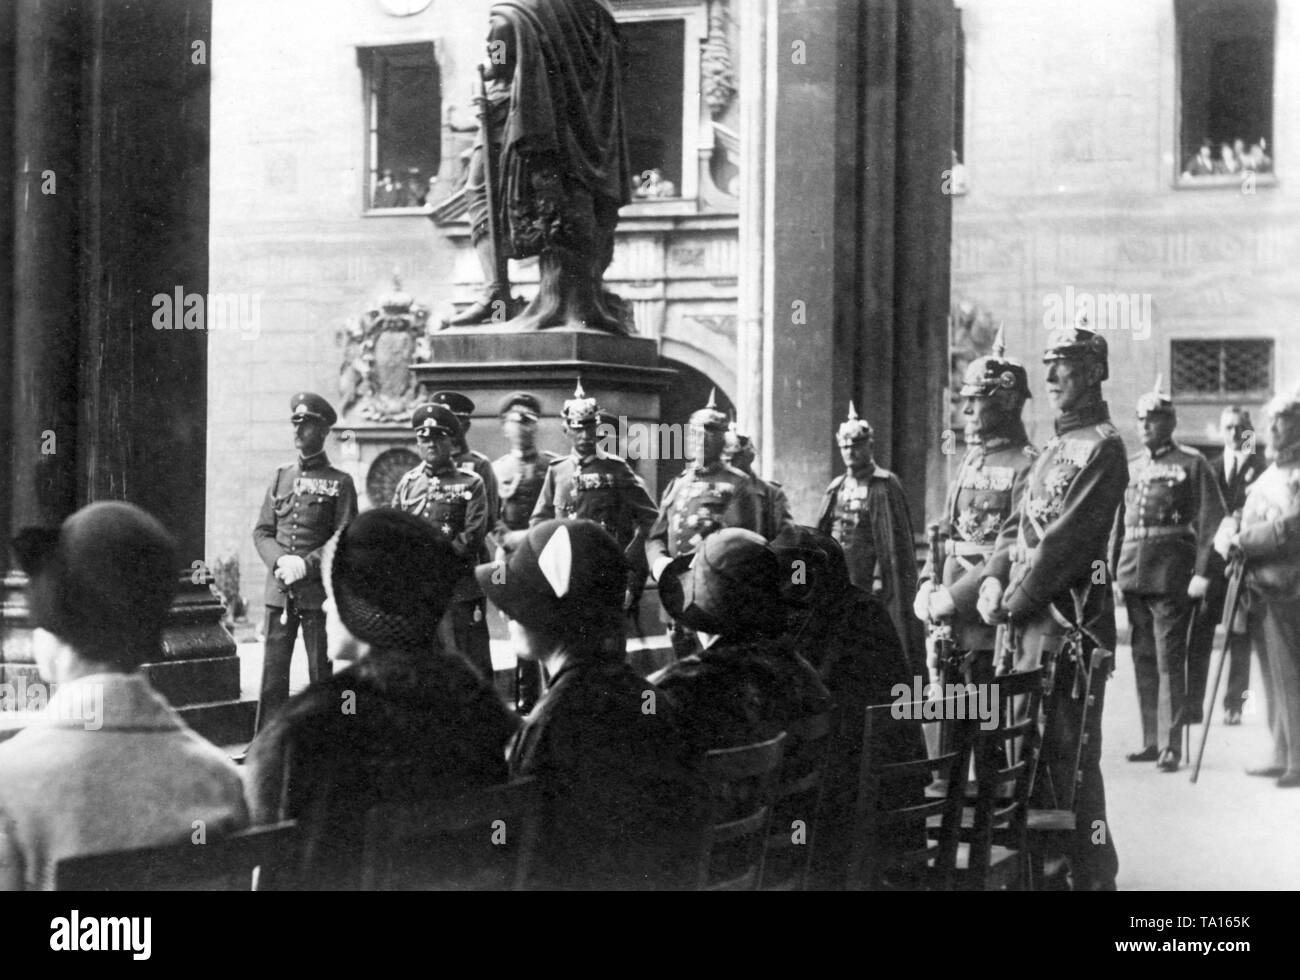 On the 75th birthday of the well-known Bavarian military leader, Colonel-General Felix Ludwig, Graf von Bothmer, at the Feldherrnhalle in Munich are consecrated  two commemorative plaques for the fallen of the Bavarian Army in the First World War and the glories of the Bavarian Army in general.  The celebration is attended by the heads of state and city authorities.From left to right standing next to the chairs Colonel-General Felix Ludwig Graf von Bothmer and Rupprecht, Crown Prince of Bavaria. Stock Photo